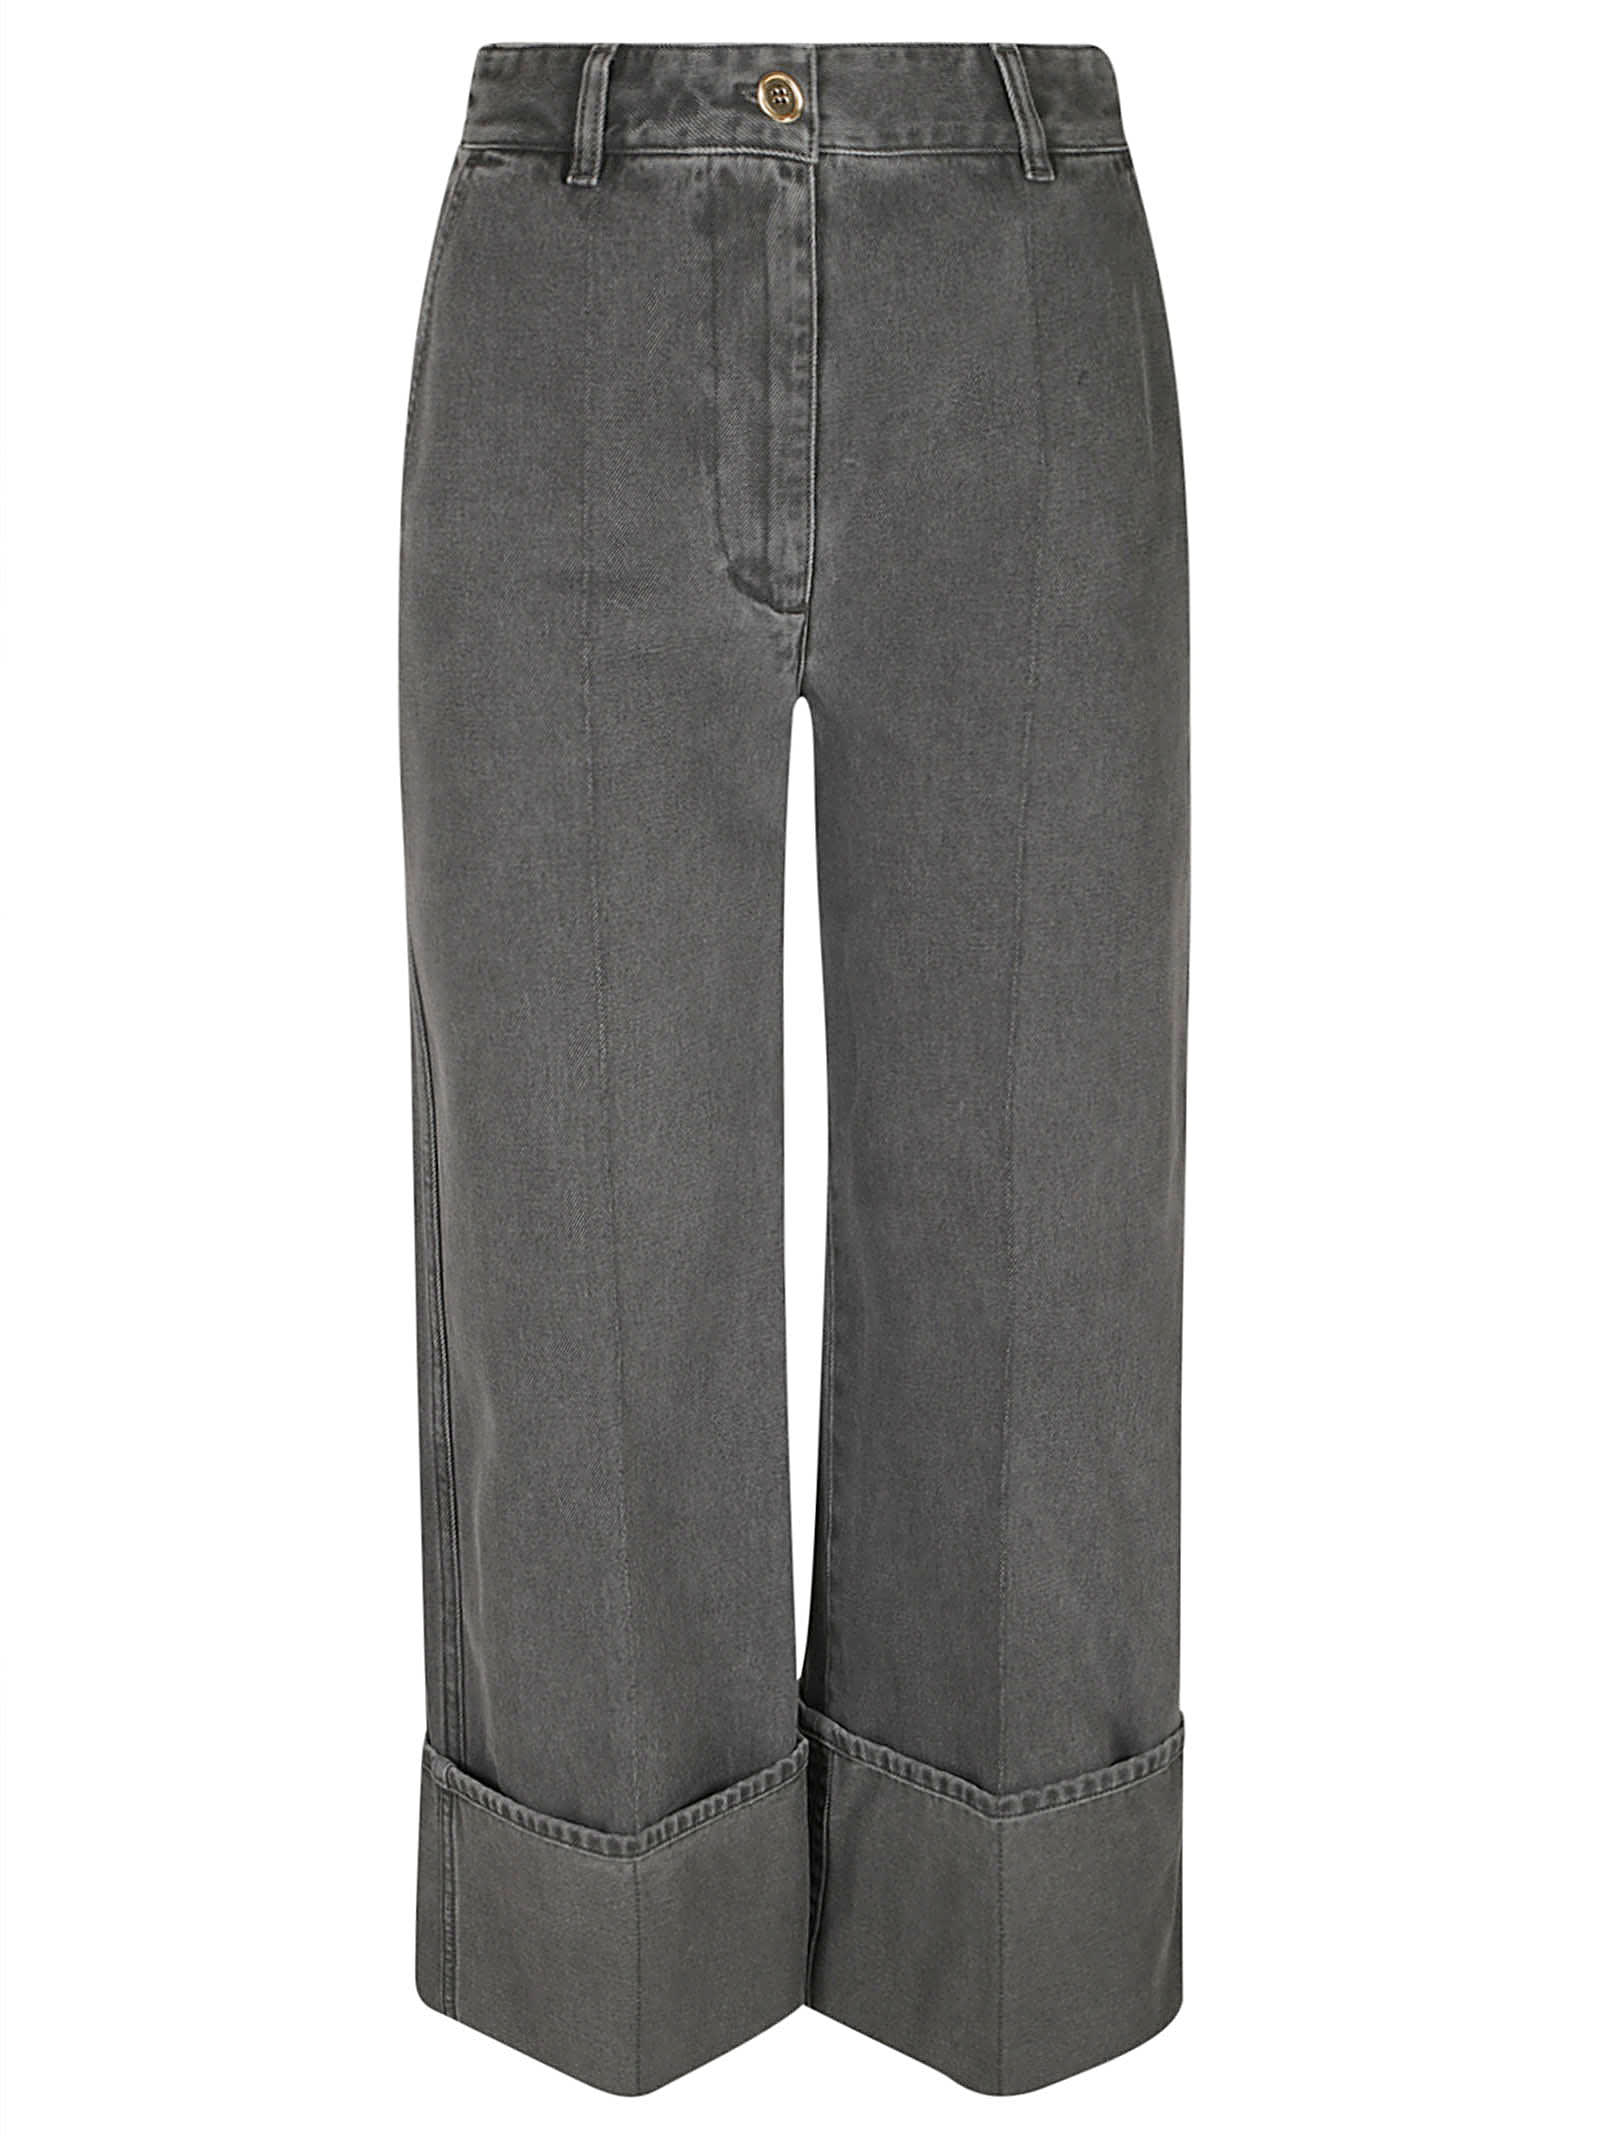 Patou Denim Iconic Trousers In Anthracite